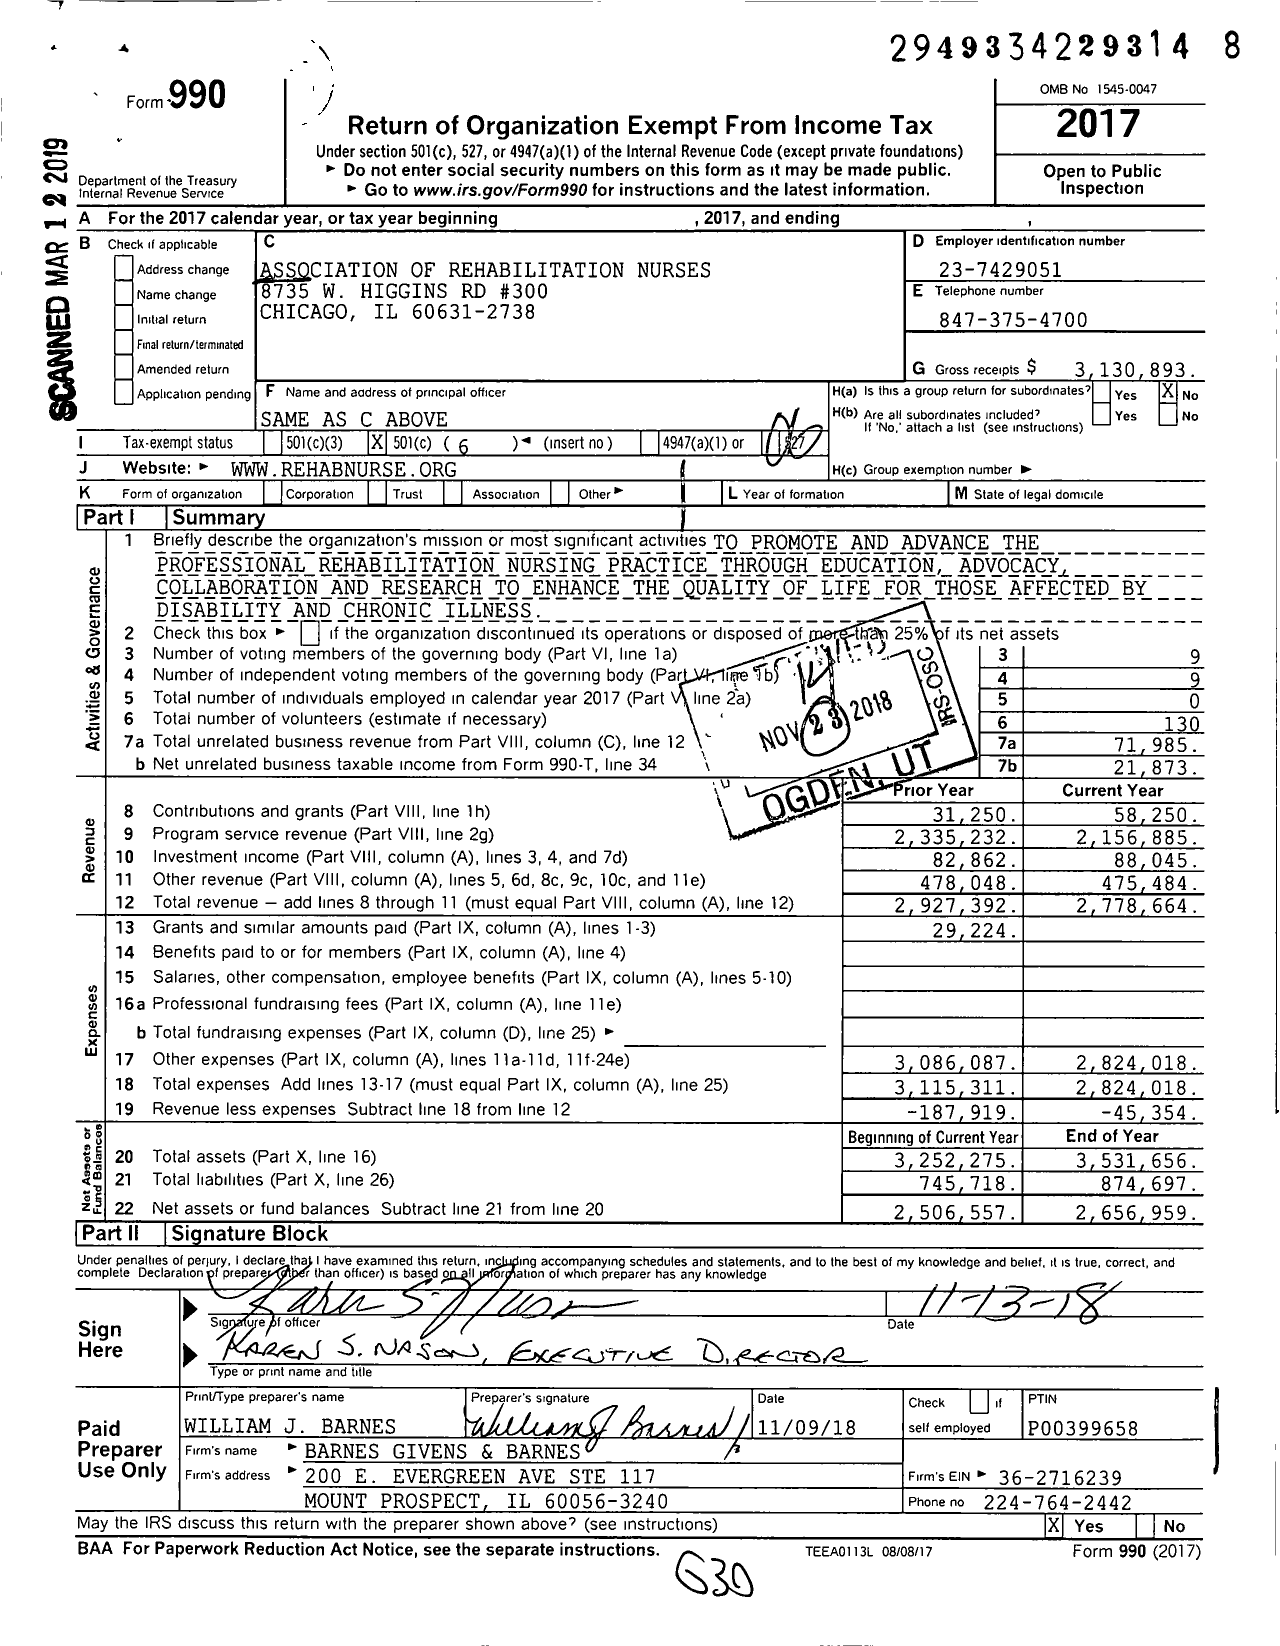 Image of first page of 2017 Form 990O for Association of Rehabilitation Nurses (ARN)